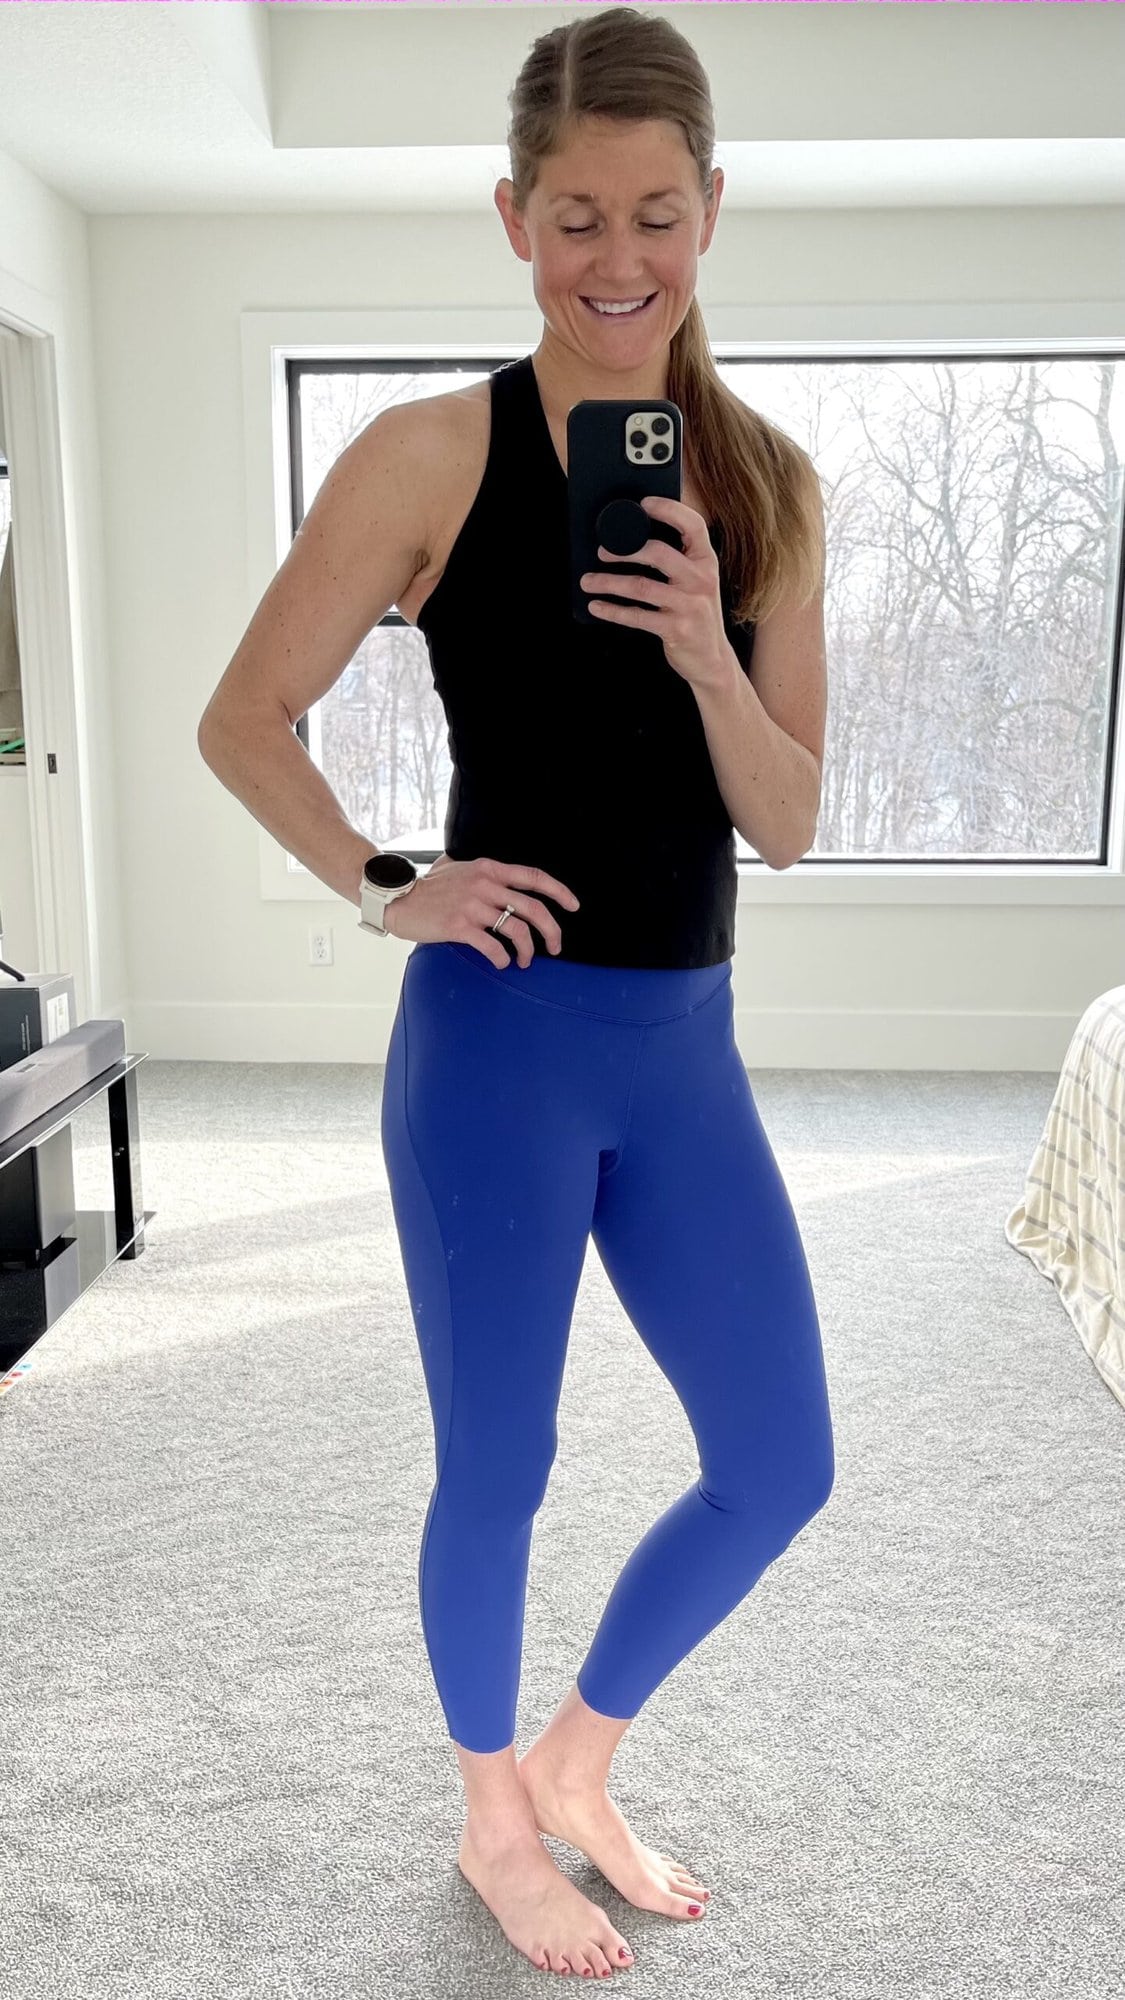 Can You Exchange Your Old Lululemon Leggings? – solowomen